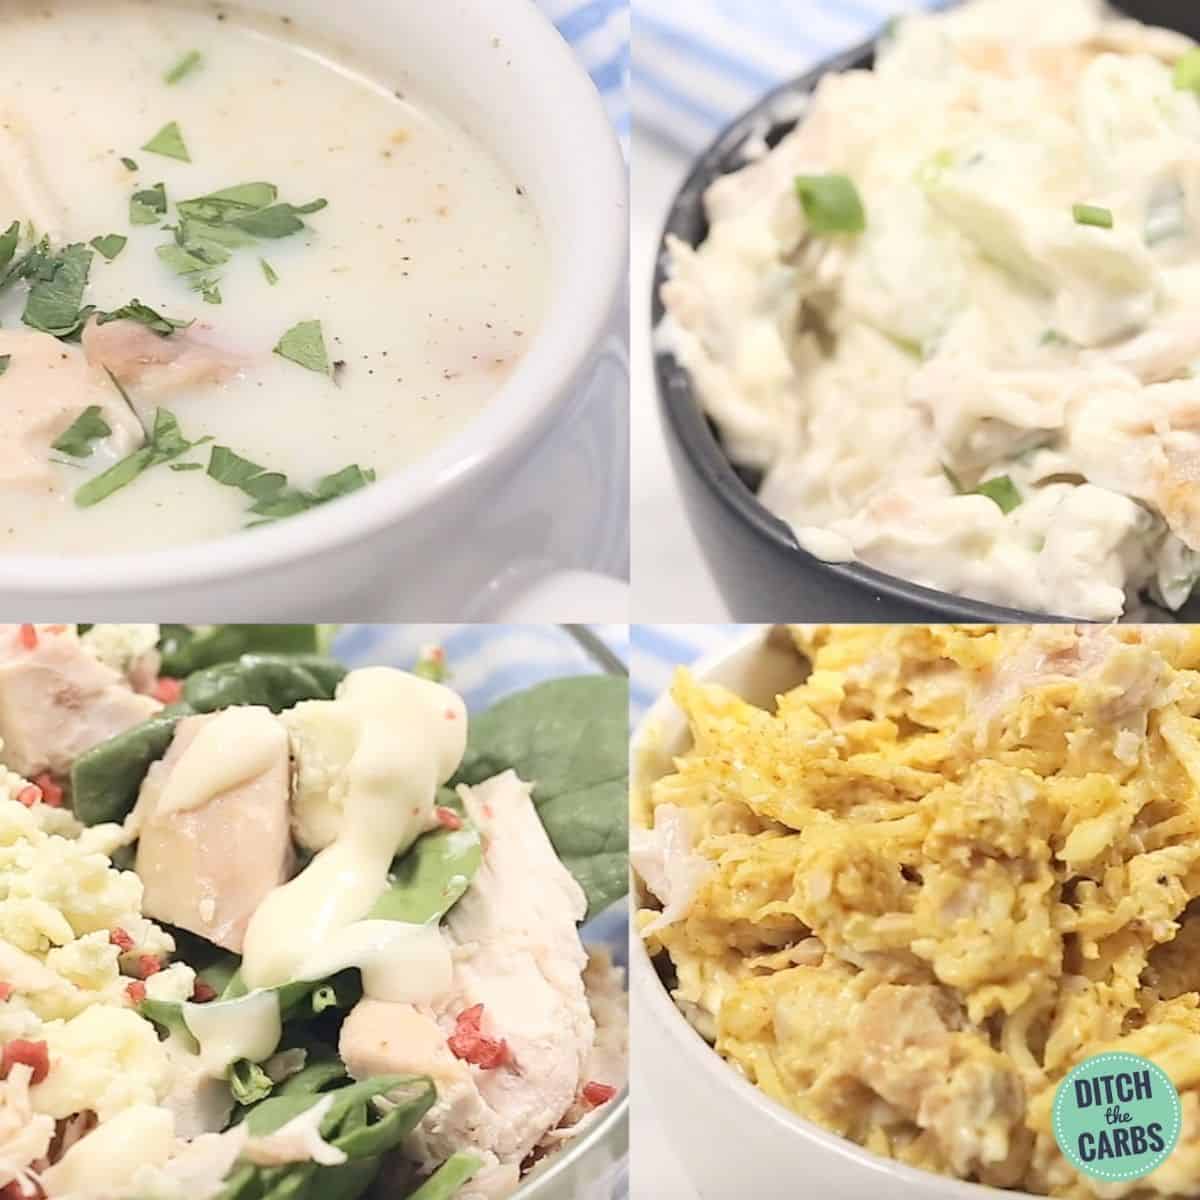 4 lazy keto chicken meals served in four different bowls